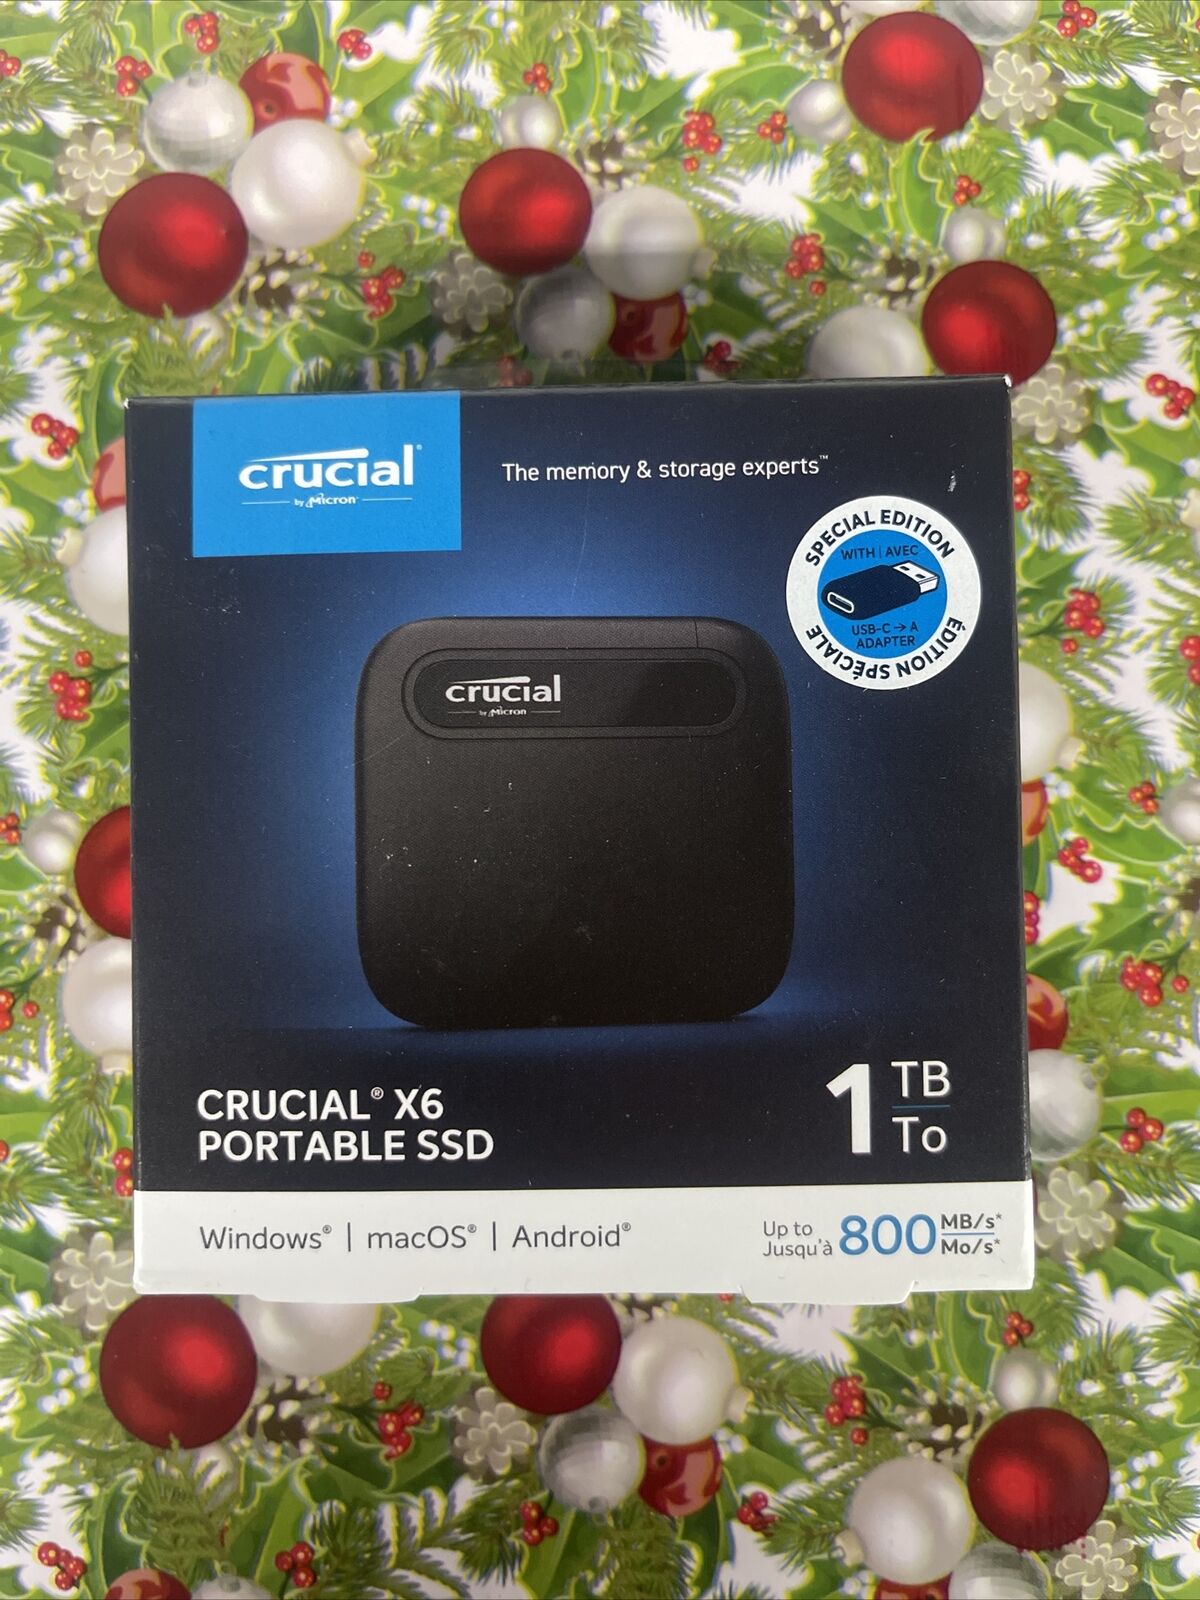 Crucial X6 Portable SSD 1TB Memory Windows/MacOS/Android. New, Sealed Box.